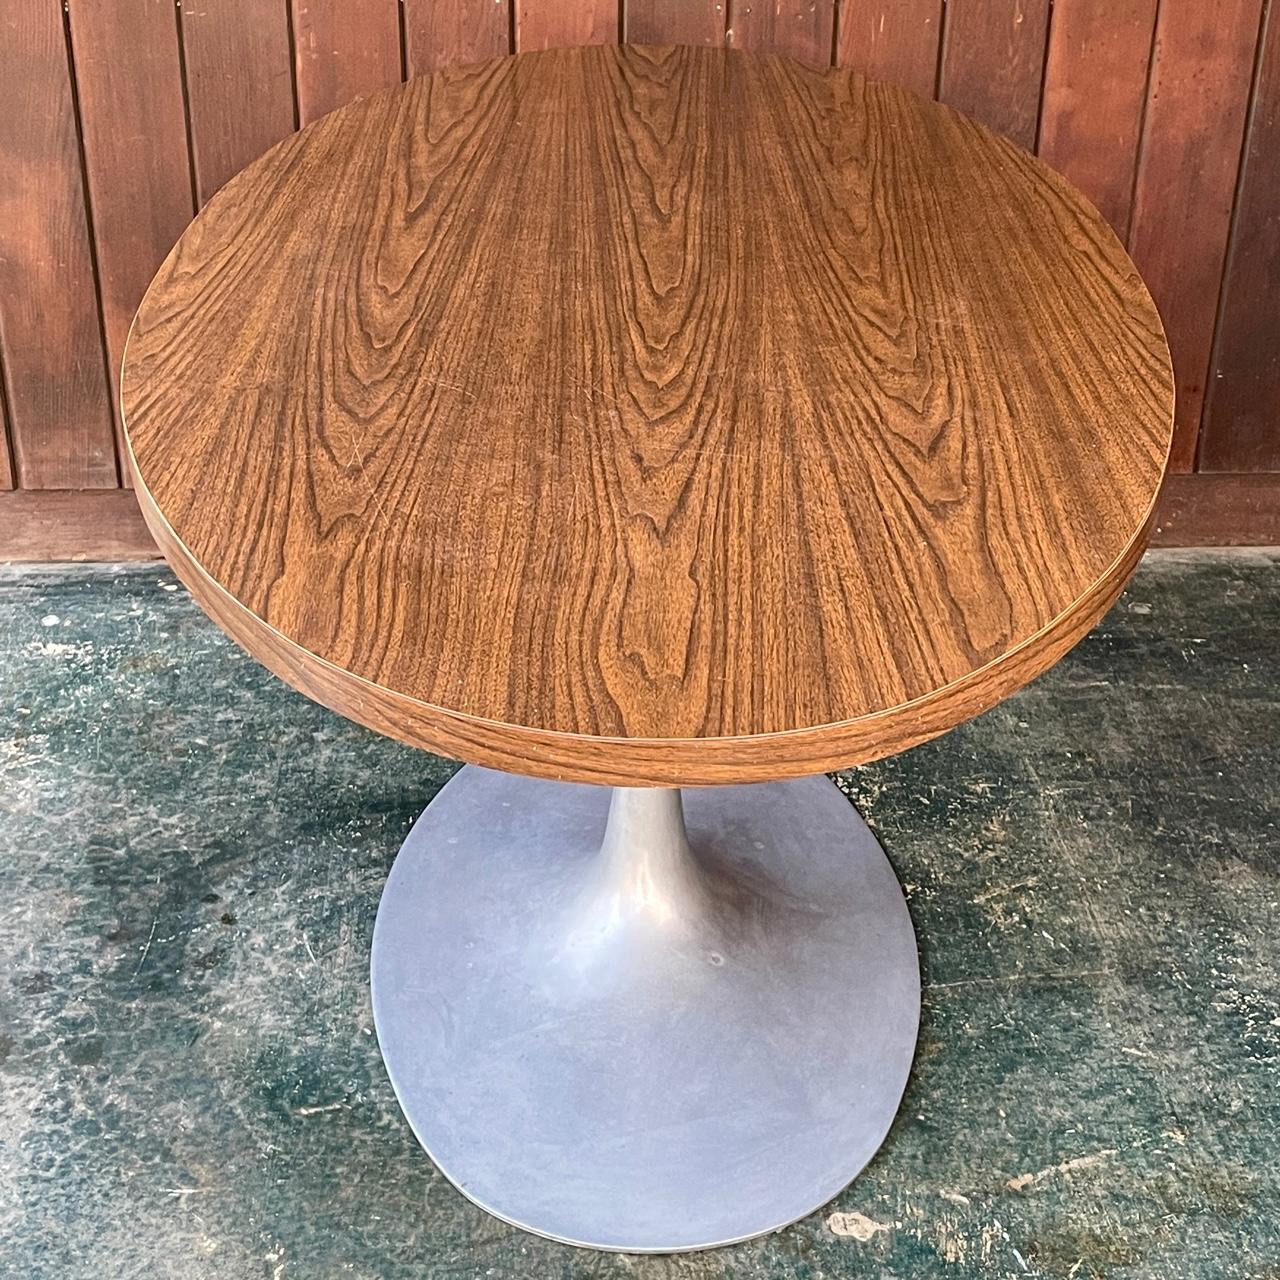 Machine-Made XL Oval Tulip Dining Table Space Age Jetsons Vintage Mid-Century Burke Arkana For Sale